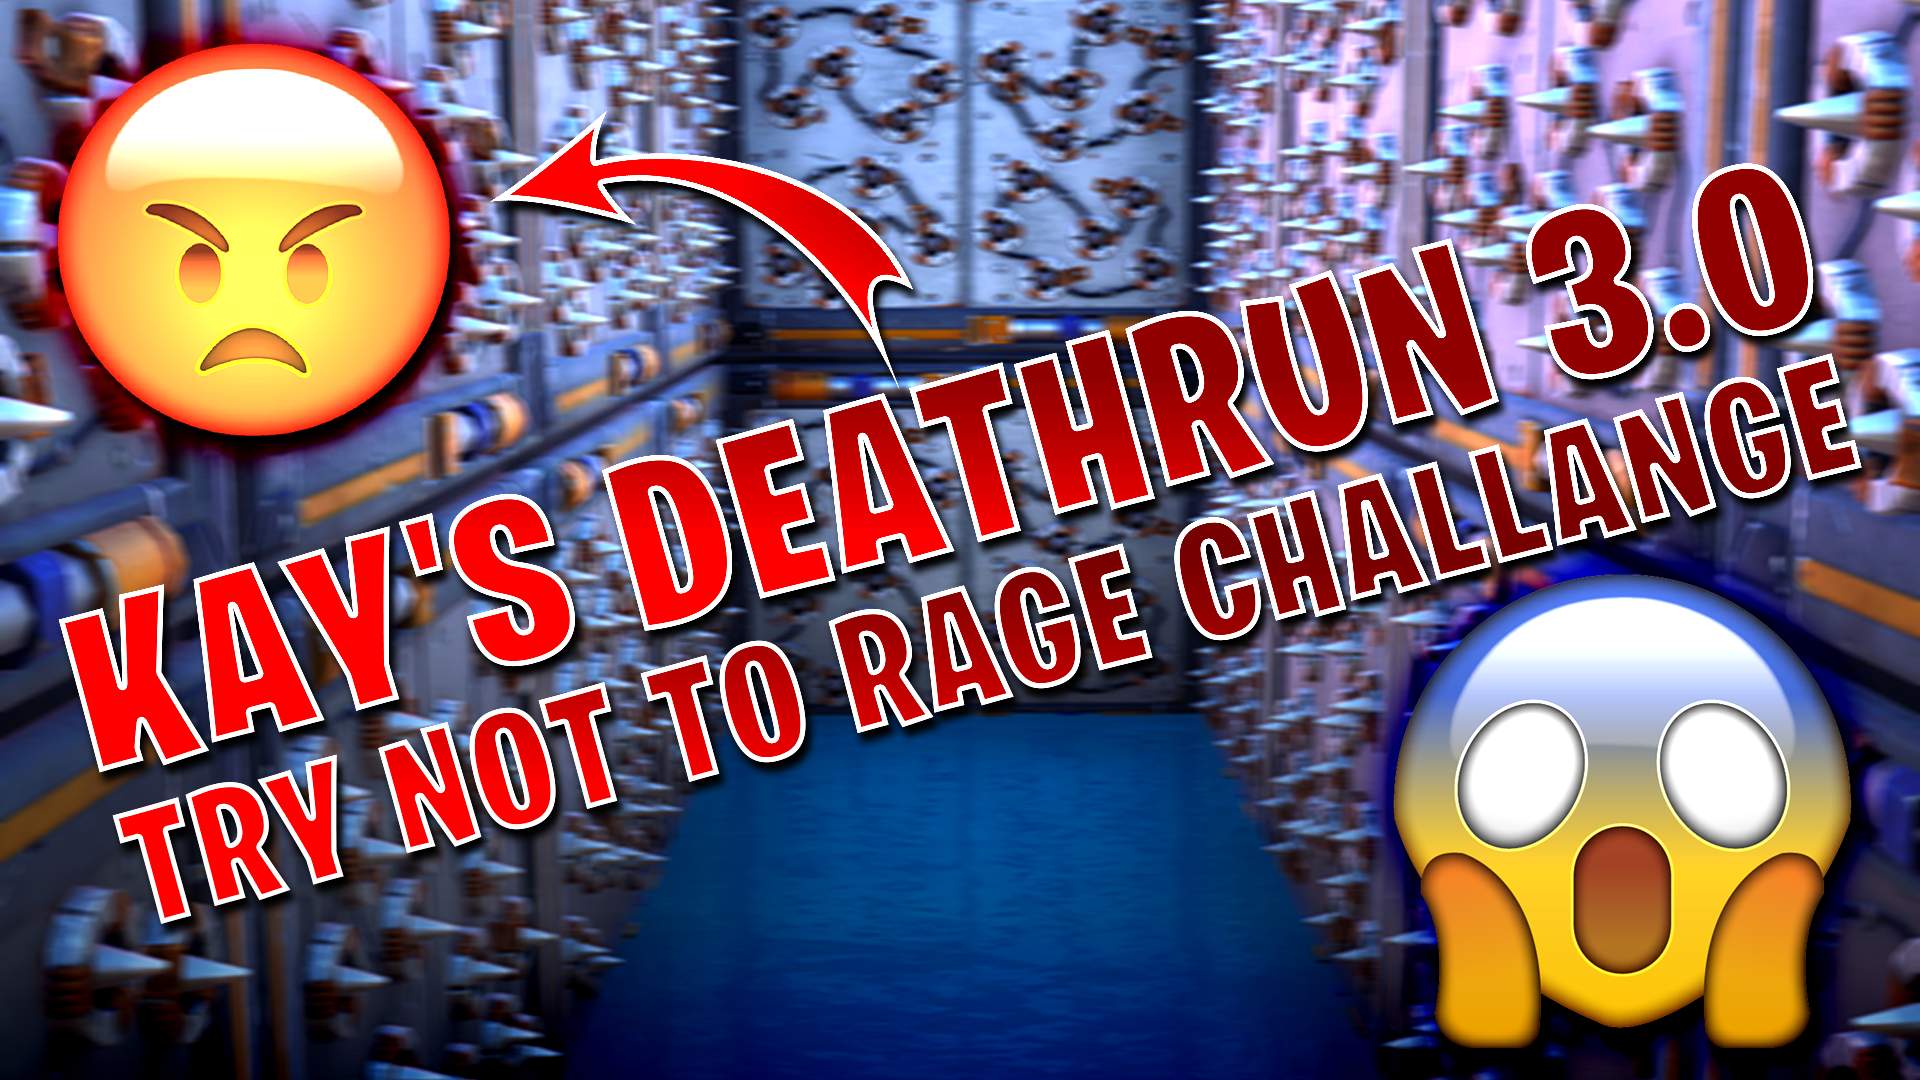 KAY'S DEATHRUN 3.0 (TRY NOT TO RAGE)